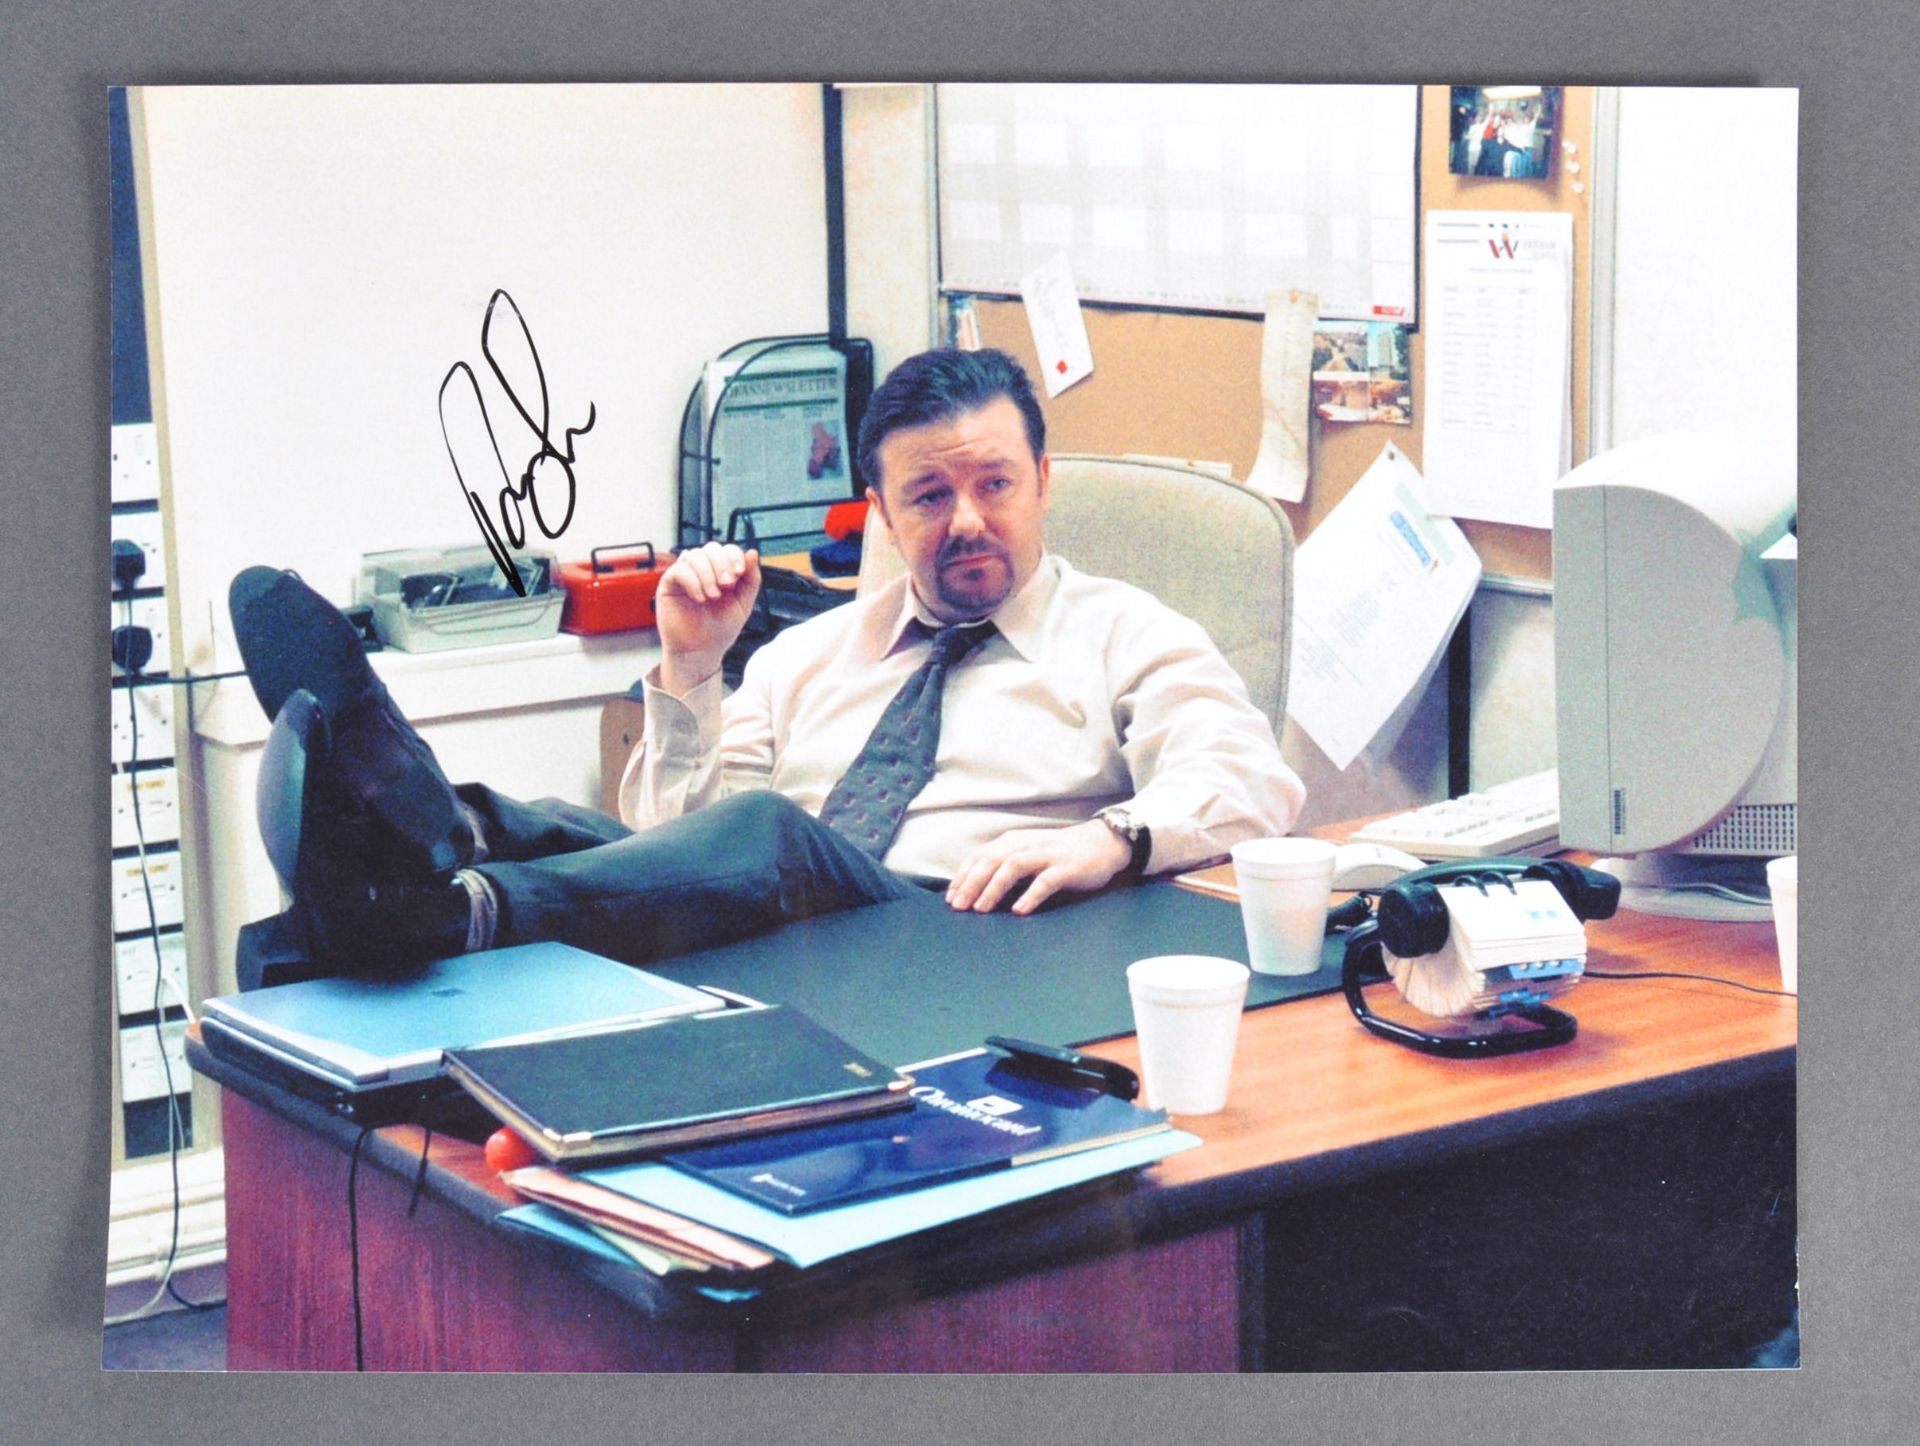 RICKY GERVAIS - THE OFFICE - IMPRESSIVE LARGE 16X1